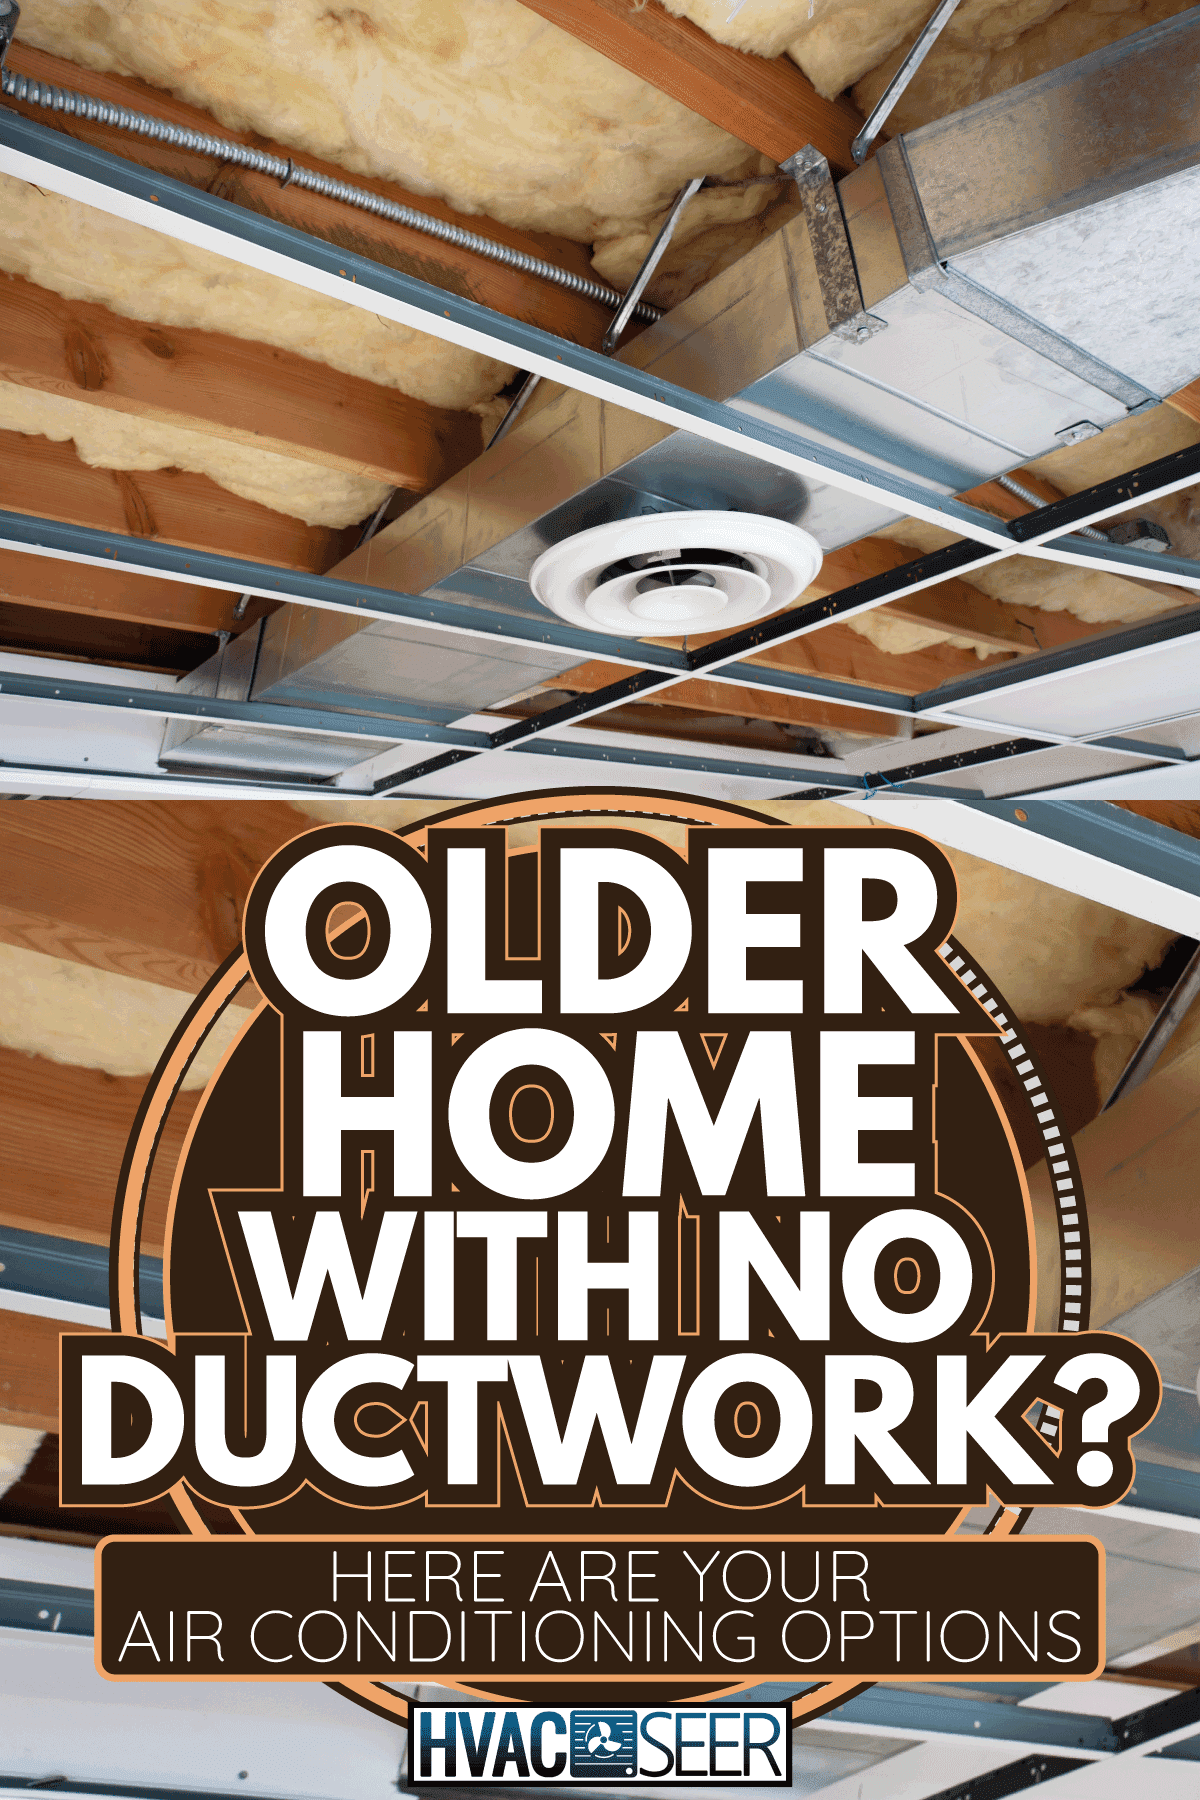 Wiring and ductwork are visible above the acoustical ceiling. Older Home With No Ductwork Here Are Your Air Conditioning Options